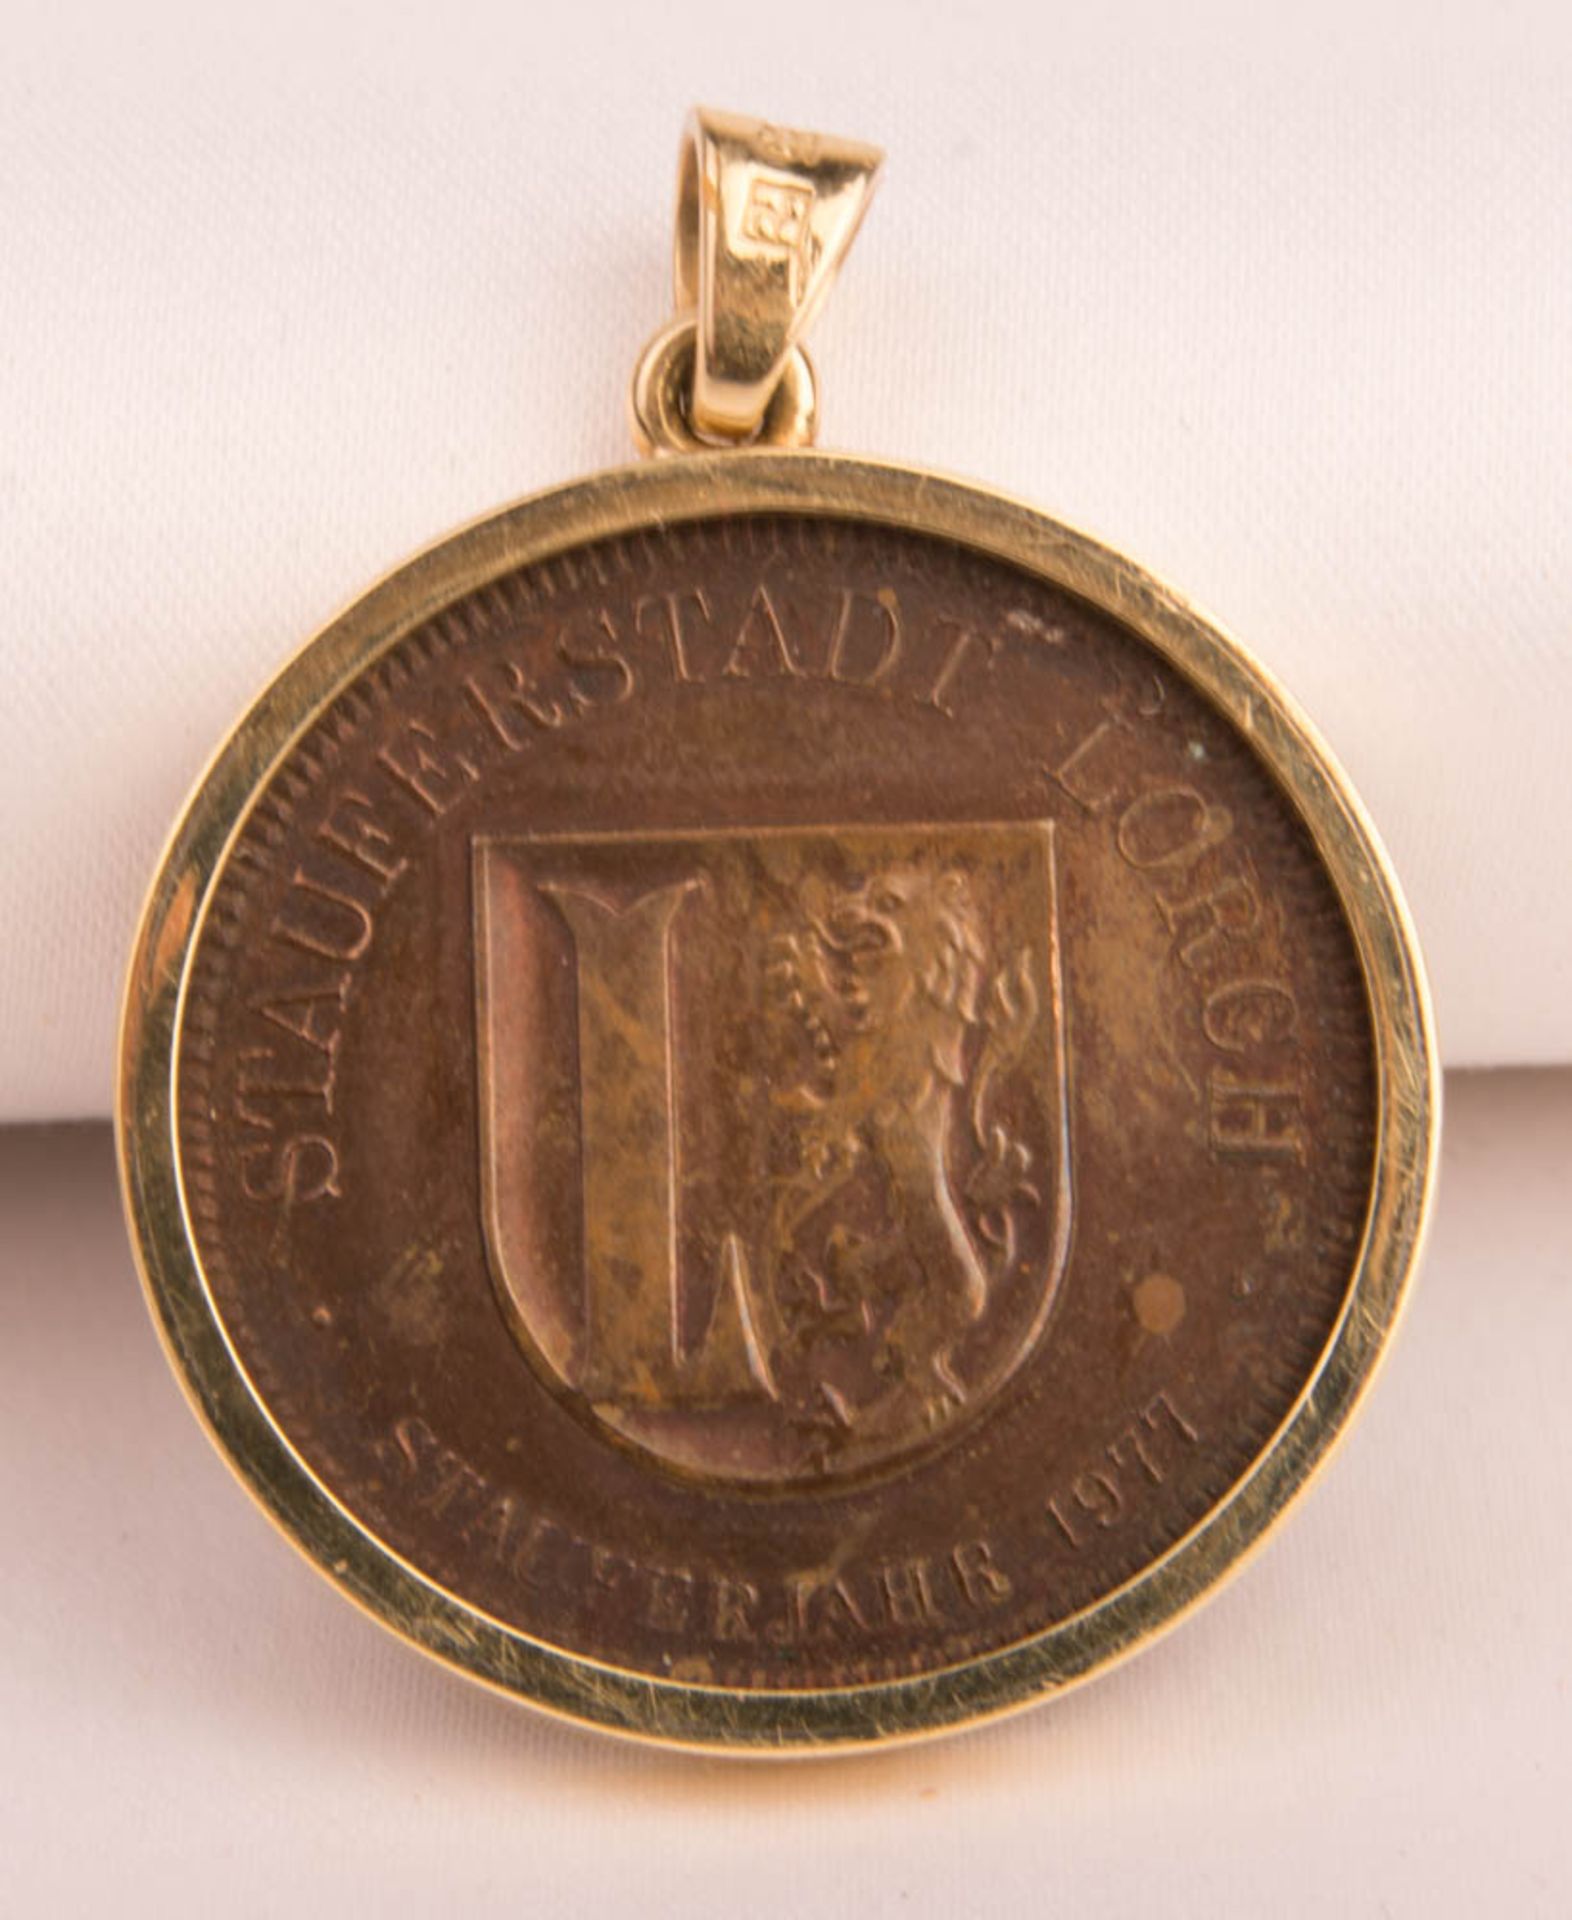 Copper medal '875 years of Lorch Monastery', 585 yellow gold. - Image 2 of 5